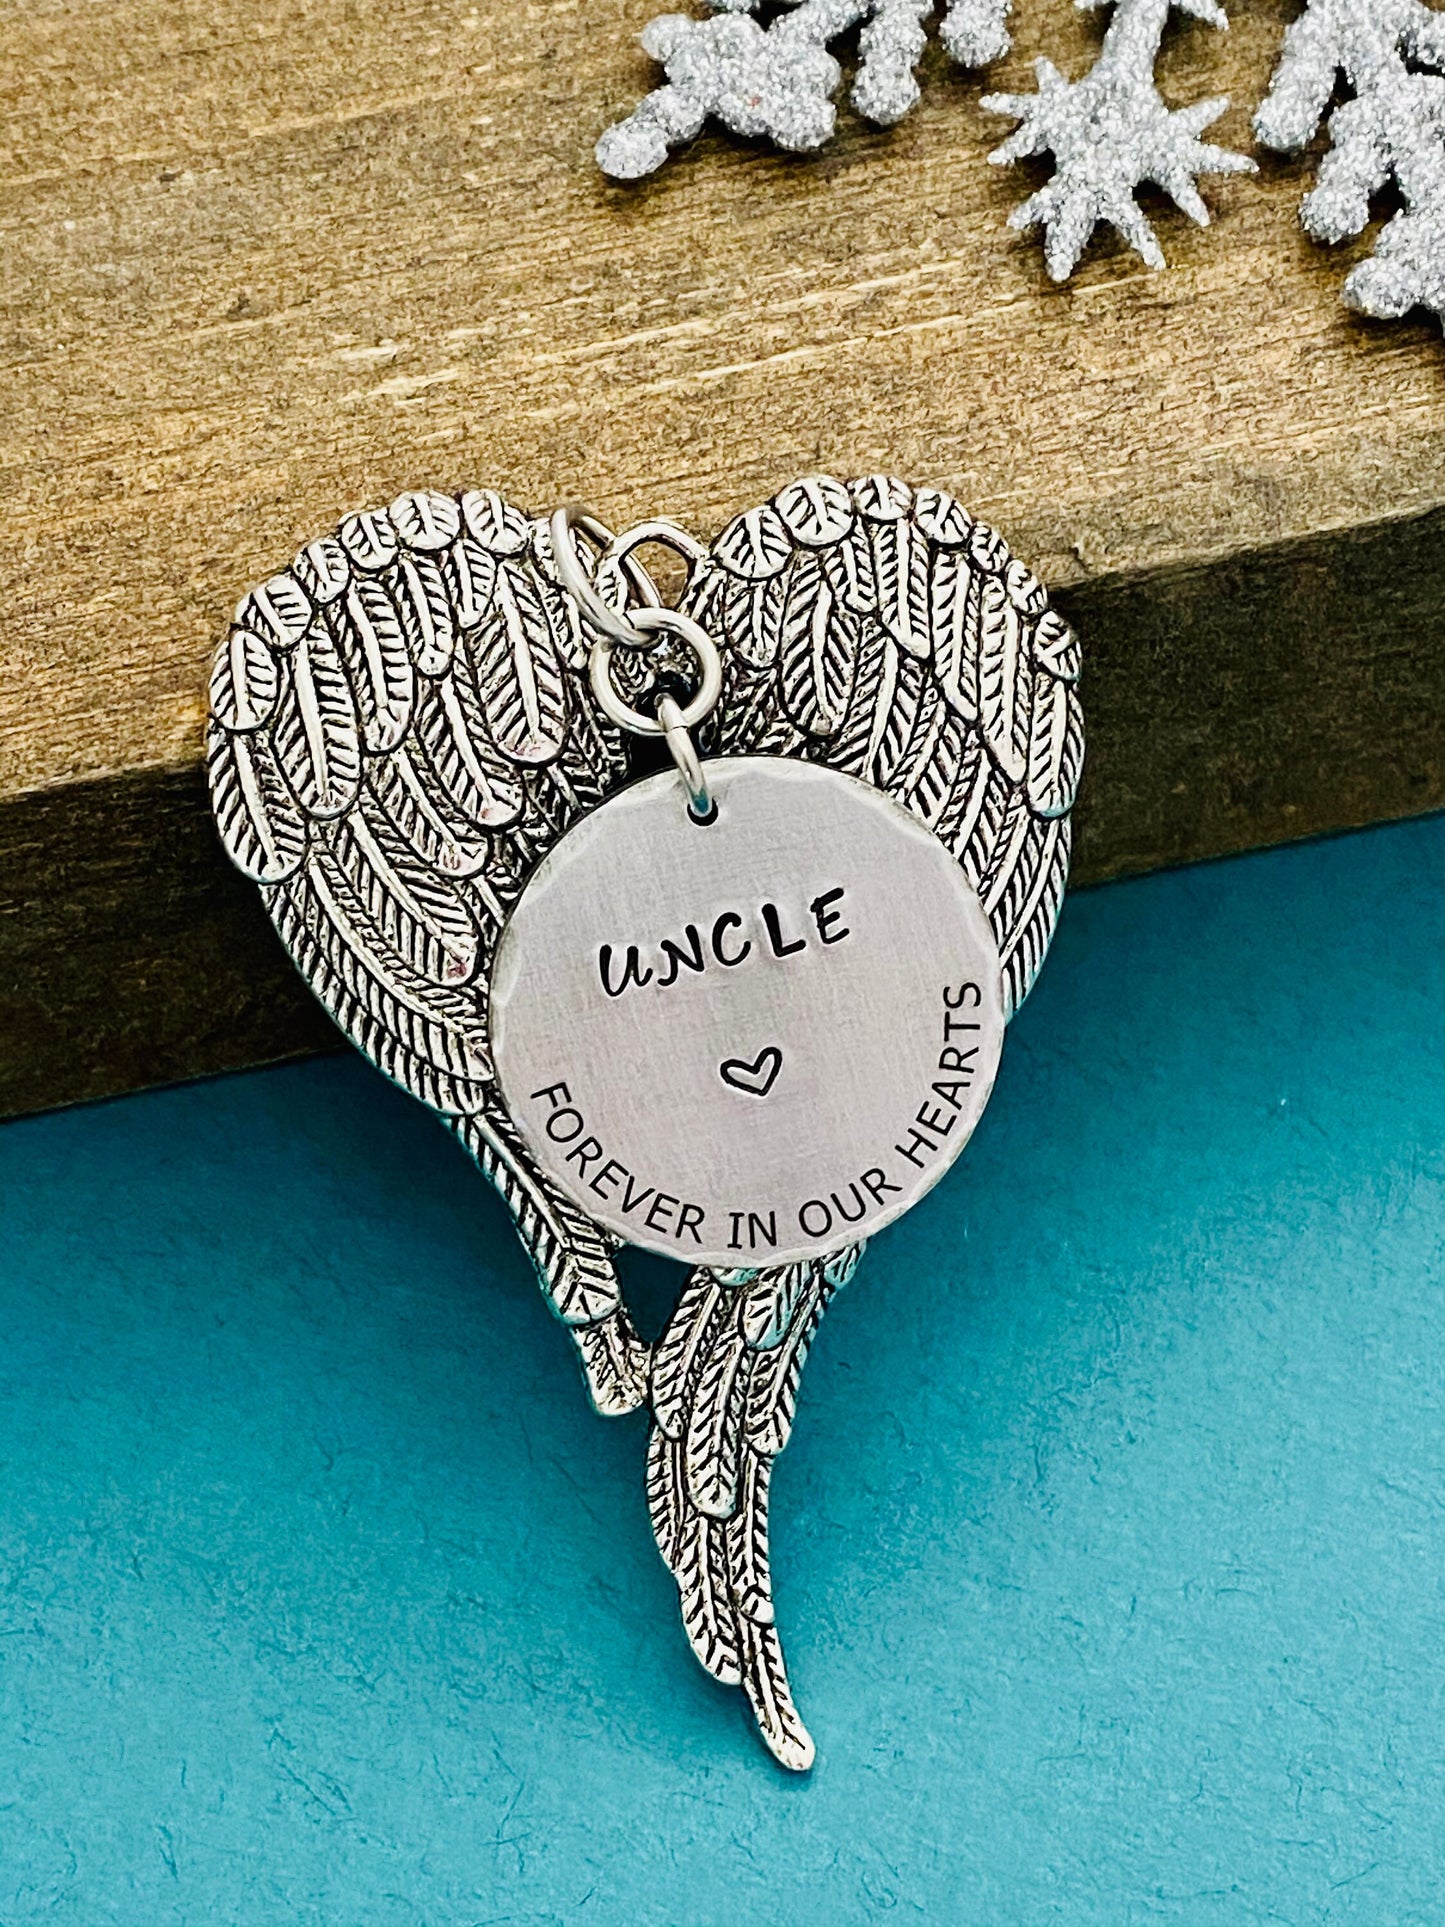 Personalized Memorial Christmas Ornament, In Memory Ornament, Remembrance Ornament Gift, Angel Wing Christmas Ornament, Hand Stamped